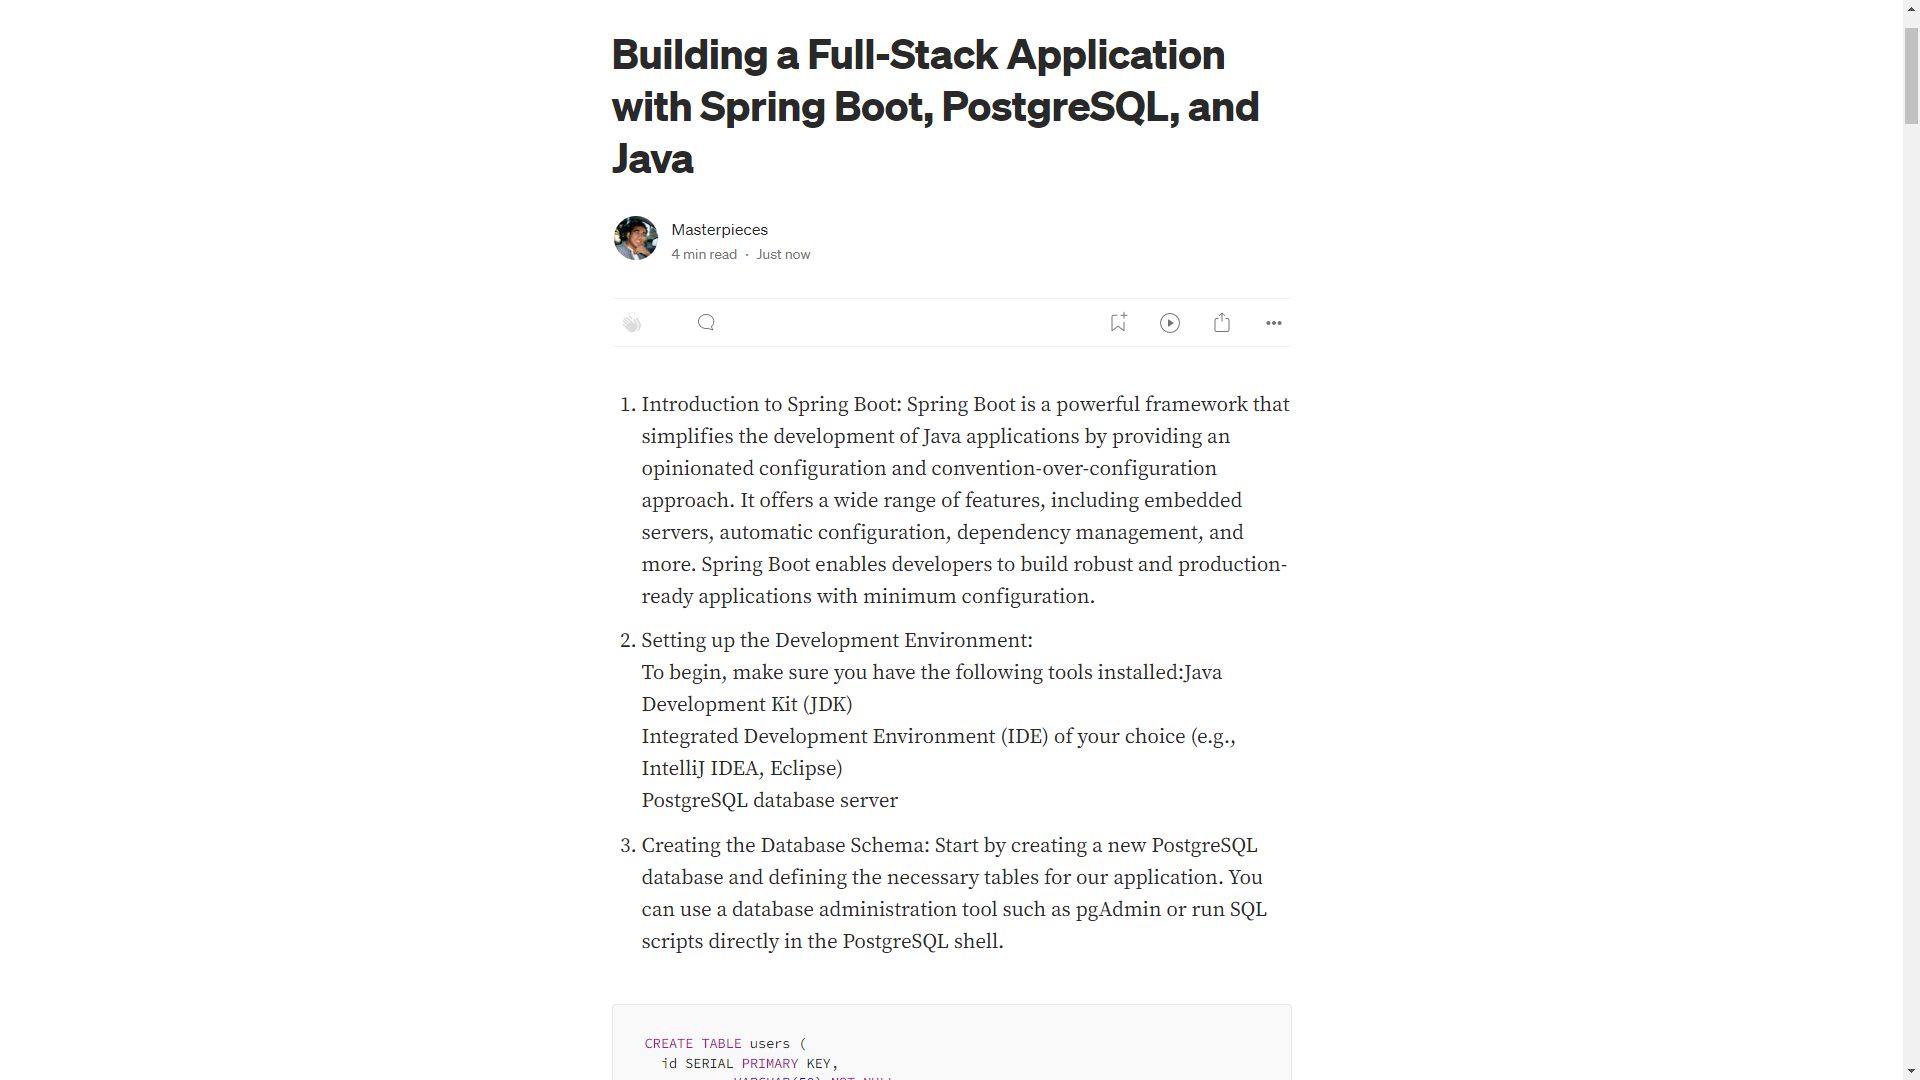 Building a Full-Stack Application with Spring Boot, PostgreSQL, and Java